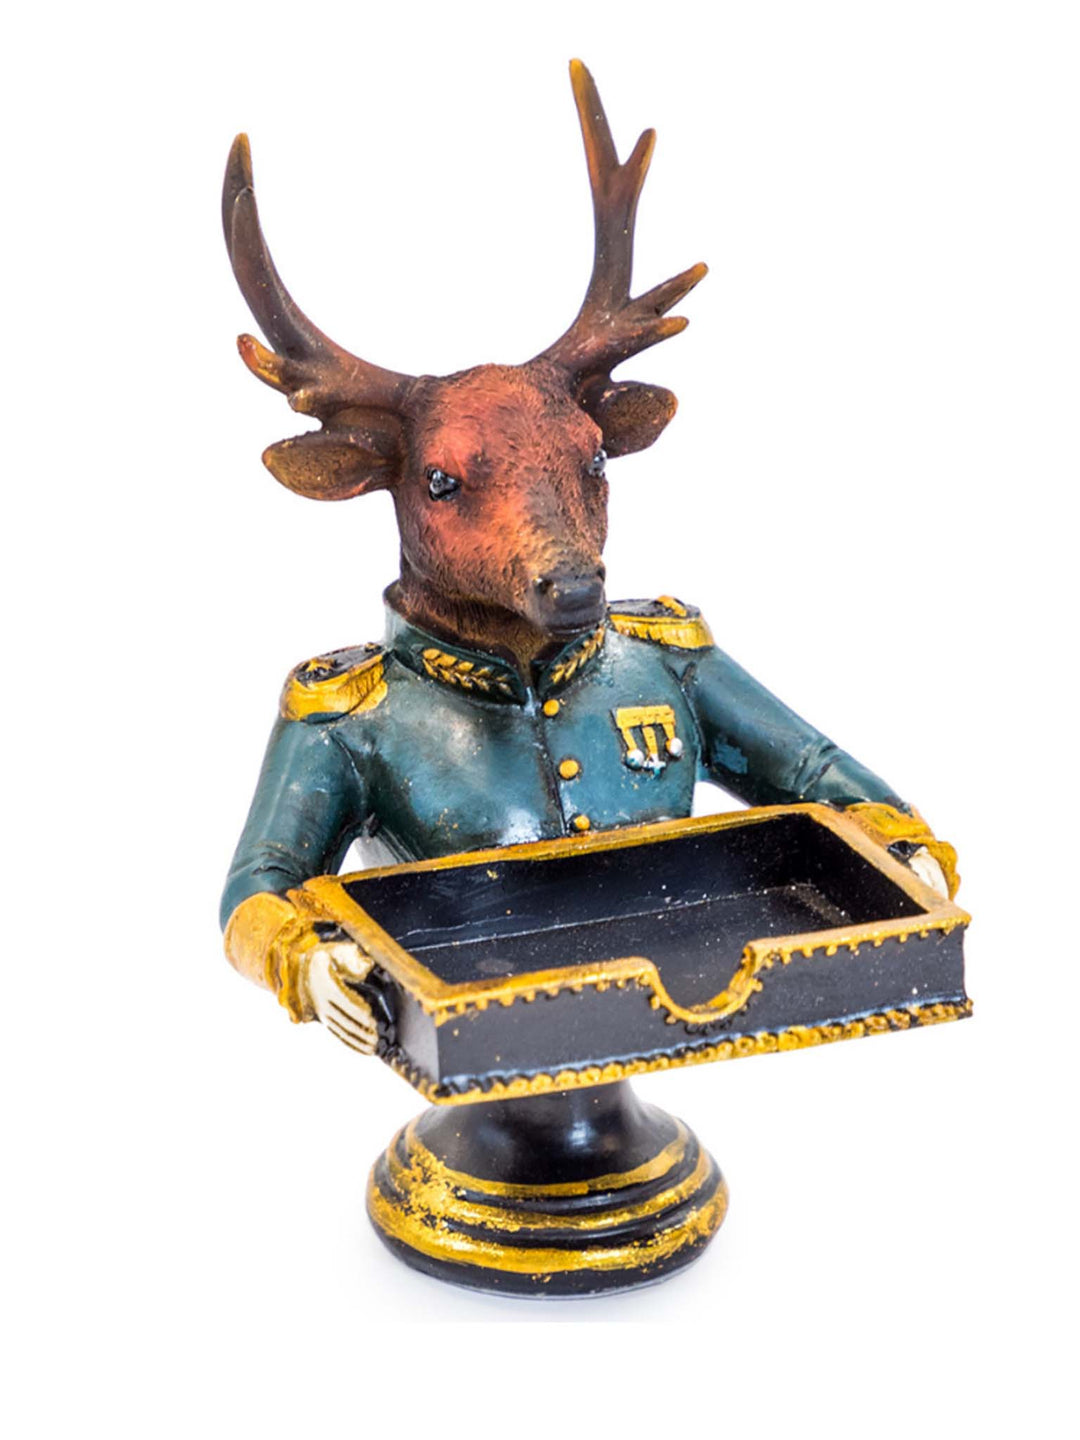 Stag Holding Sweet Tray, Deer Key Holder